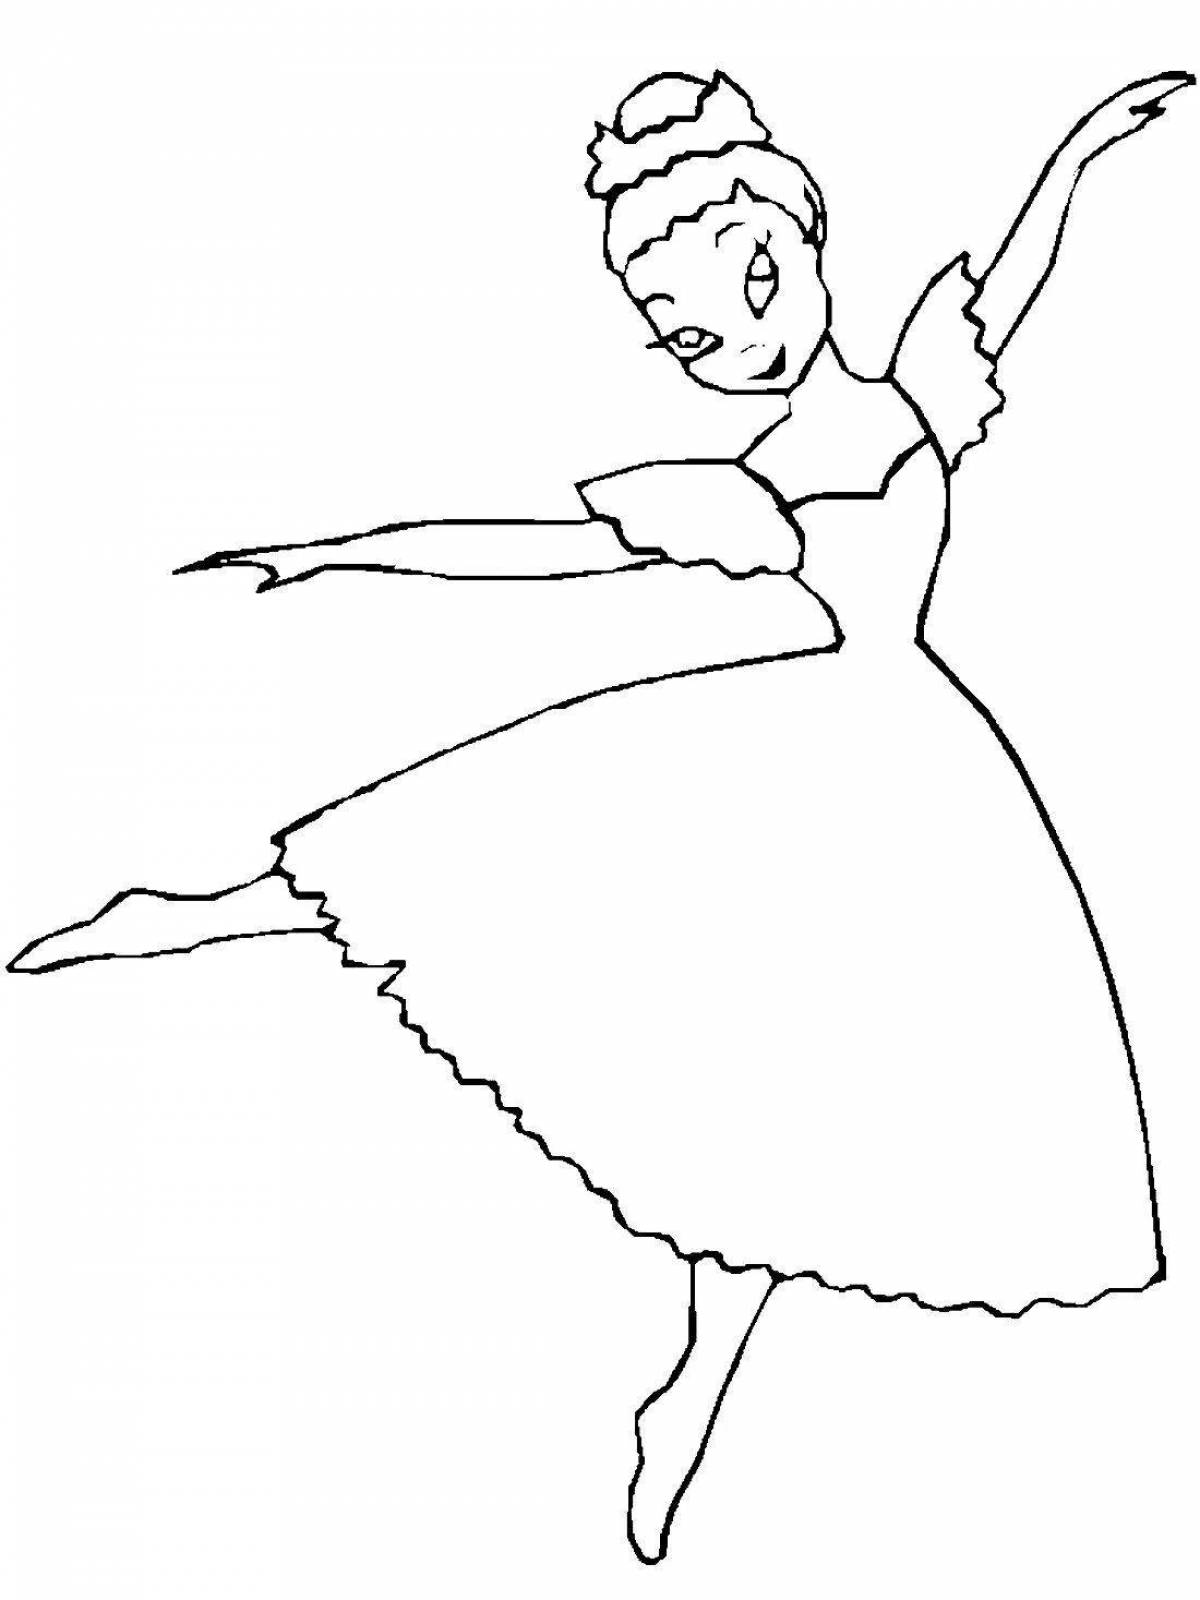 Artistic drawing of a ballerina